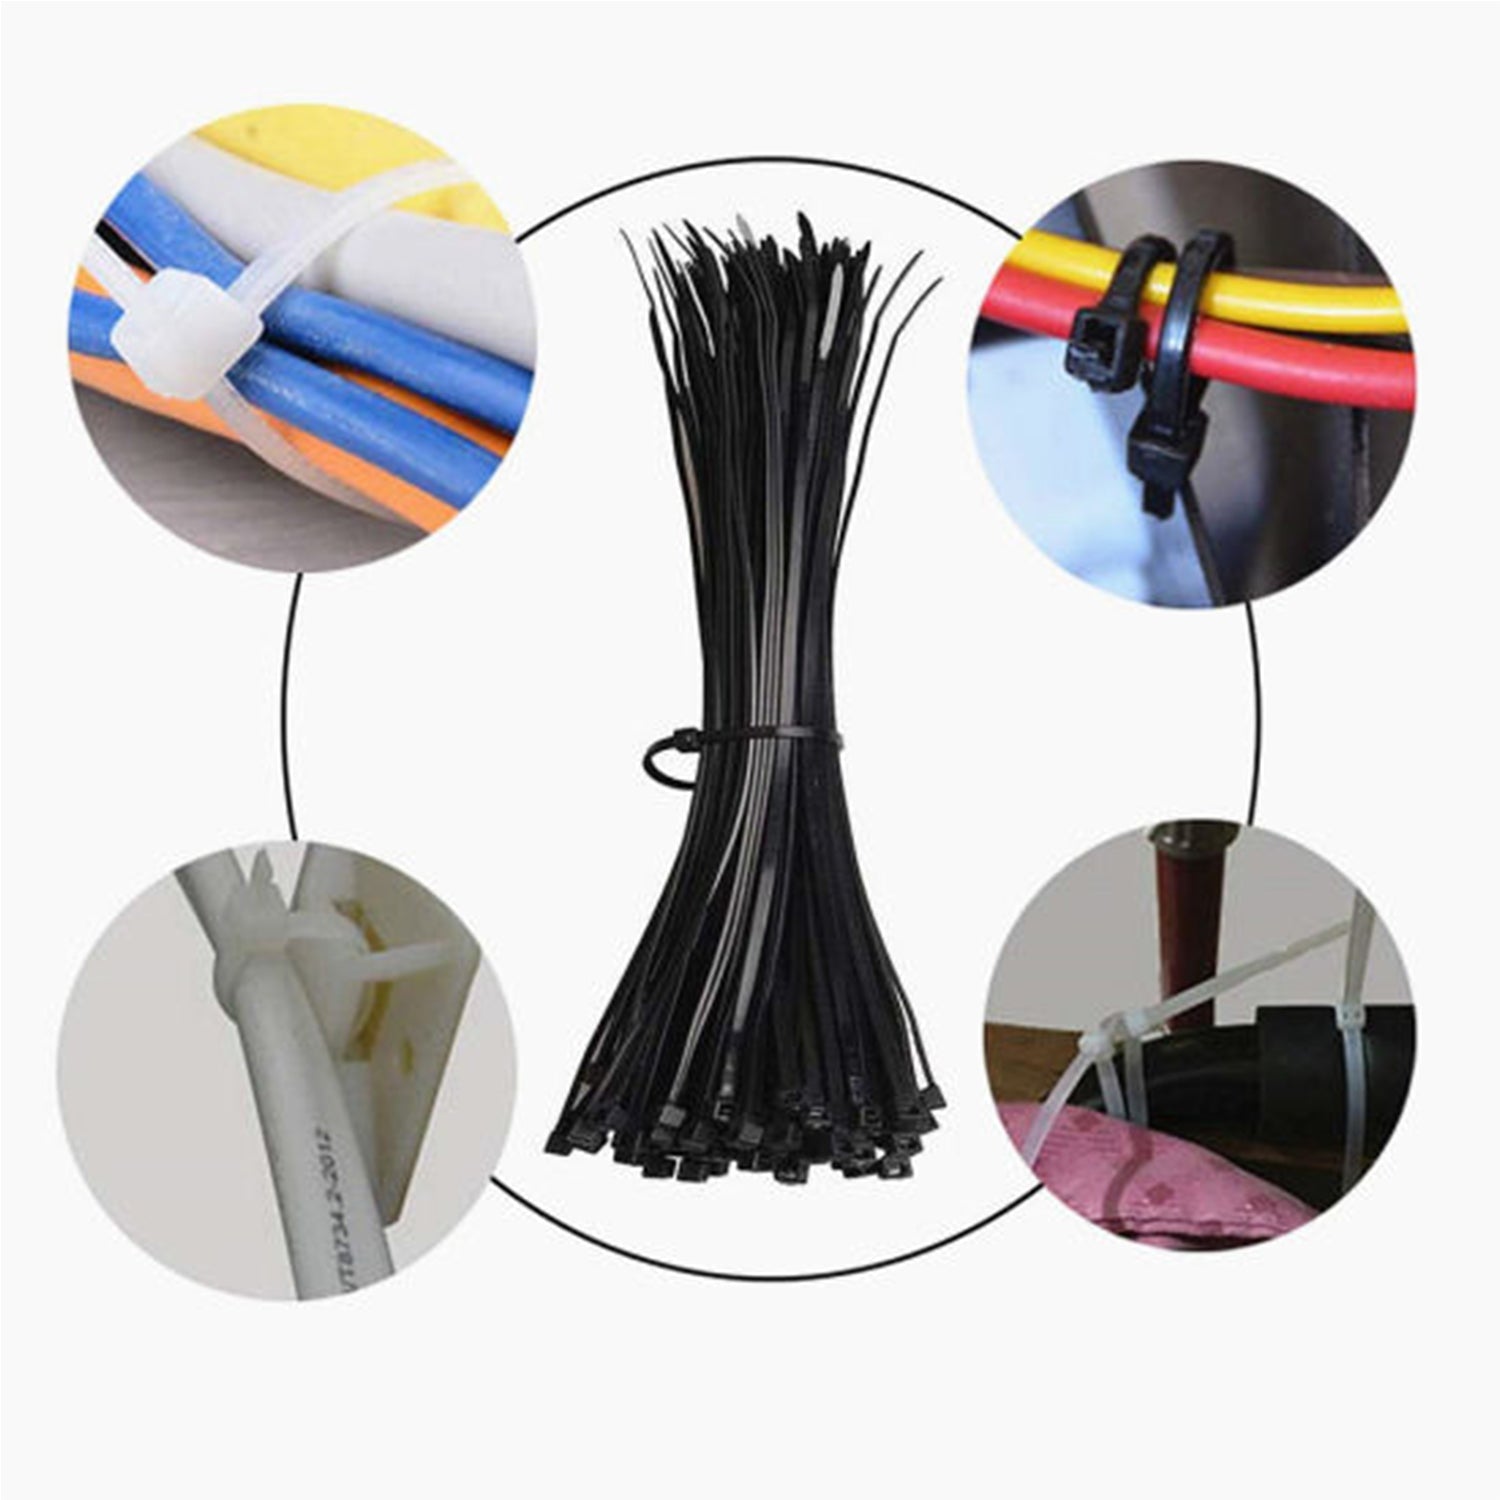 3140 8Inch Nylon Self Locking Cable Ties, Heavy Duty Strong Zip Wire Tie. Pack of 100 - Black. DeoDap